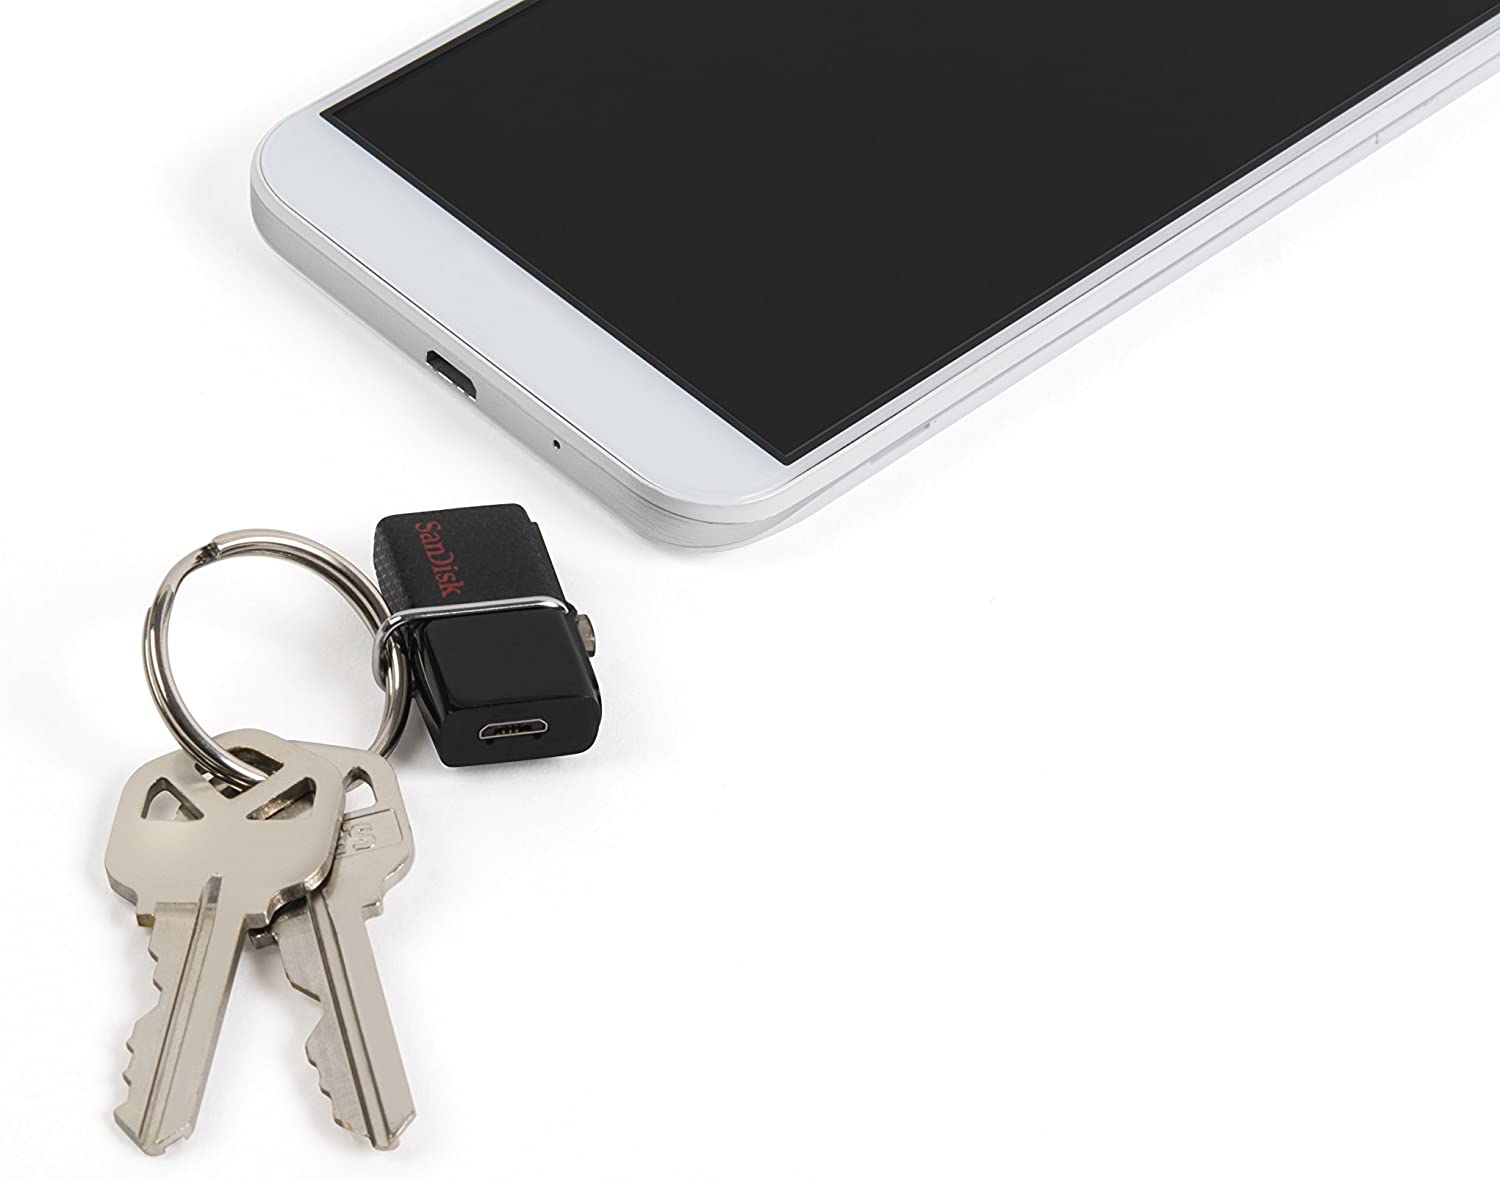 SanDisk Ultra Dual Micro USB Drive 3.0 Android